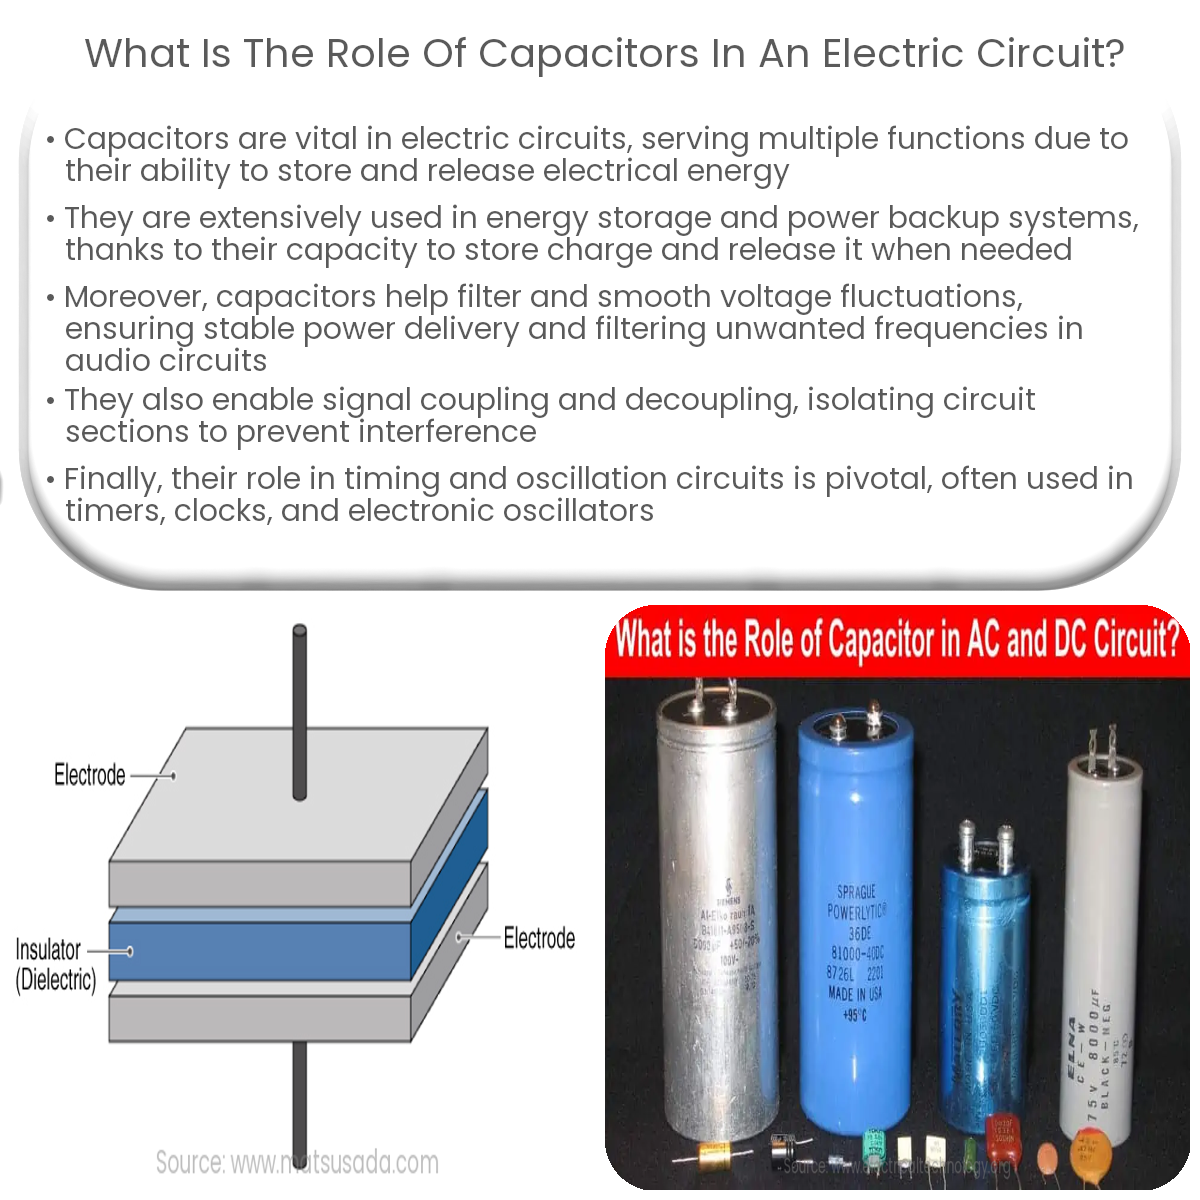 What is the role of capacitors in an electric circuit?